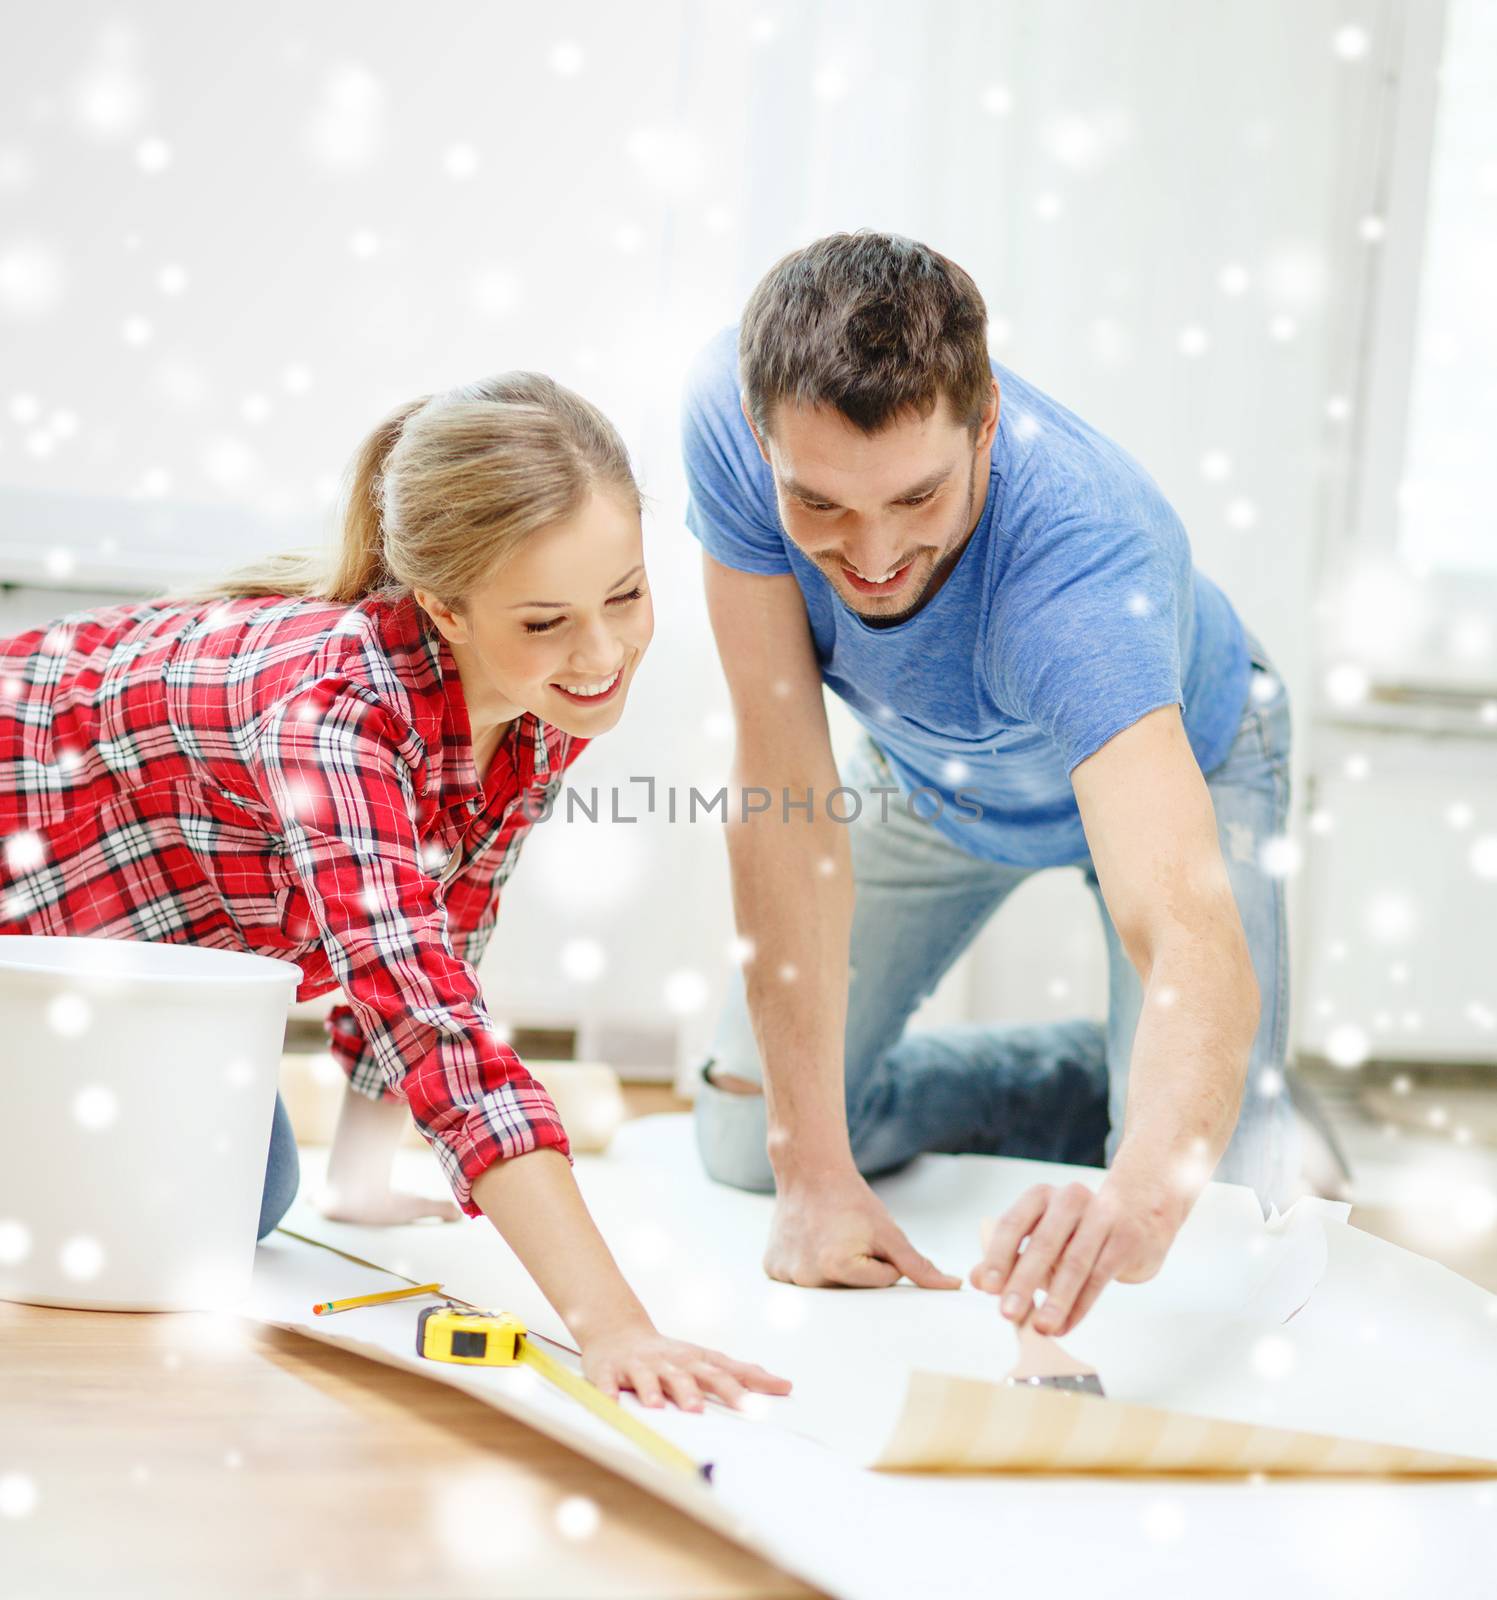 repair, building, teamwork and home concept - smiling couple smearing wallpaper with glue